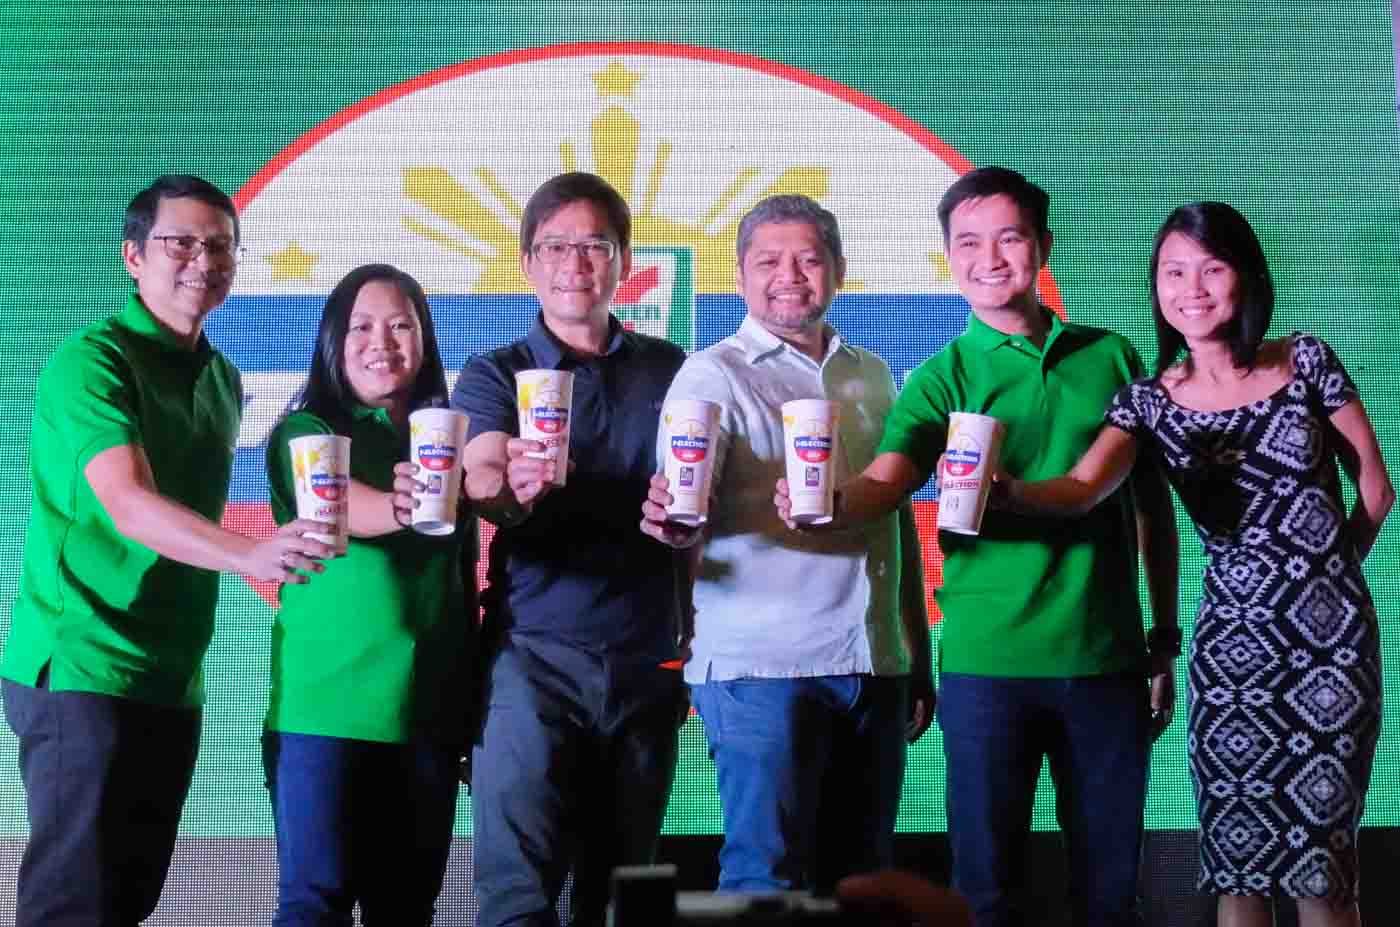 PARTNERSHIP. Philippine Seven Corporation’s executives, together with representatives from official media partners Rappler and CNN Philippines hold out their 7-Election GULP Cups. From L-R: Lee Esguerra, Marketing Commuciations Division Head Armi Cagasan, Strategic Merchandise Division Head, Richard Lee, VP for Supply Chain, Joel Macaventa, CNN Philippines Marketing Head, Jenny Chua, Rappler Head of Communities and Senior Content Strategy Director 